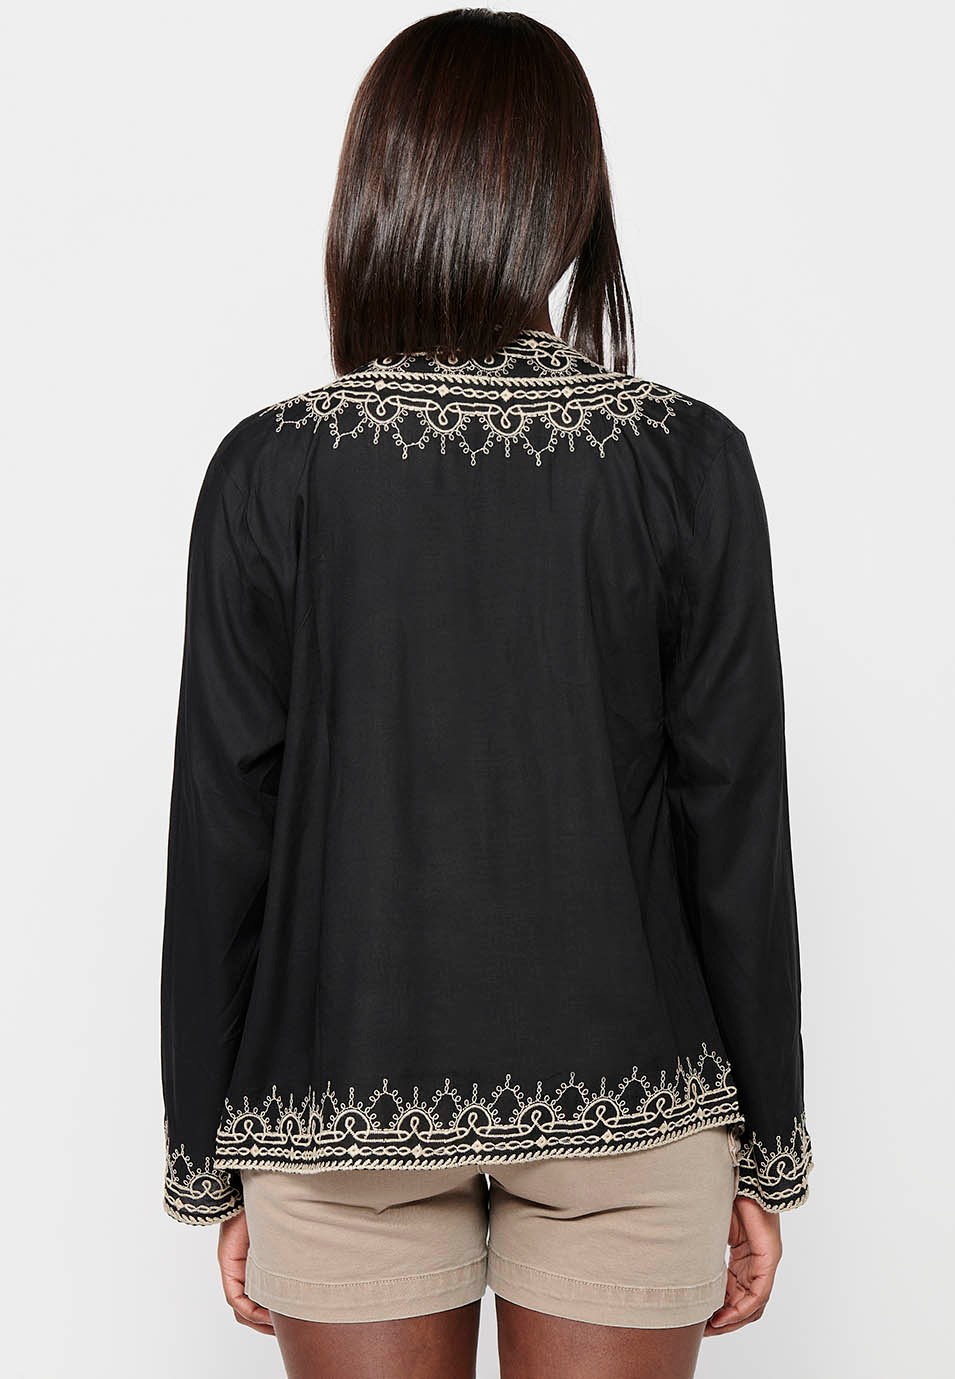 Open jacket with peak finishes and floral embroidered details in Black for Women 8